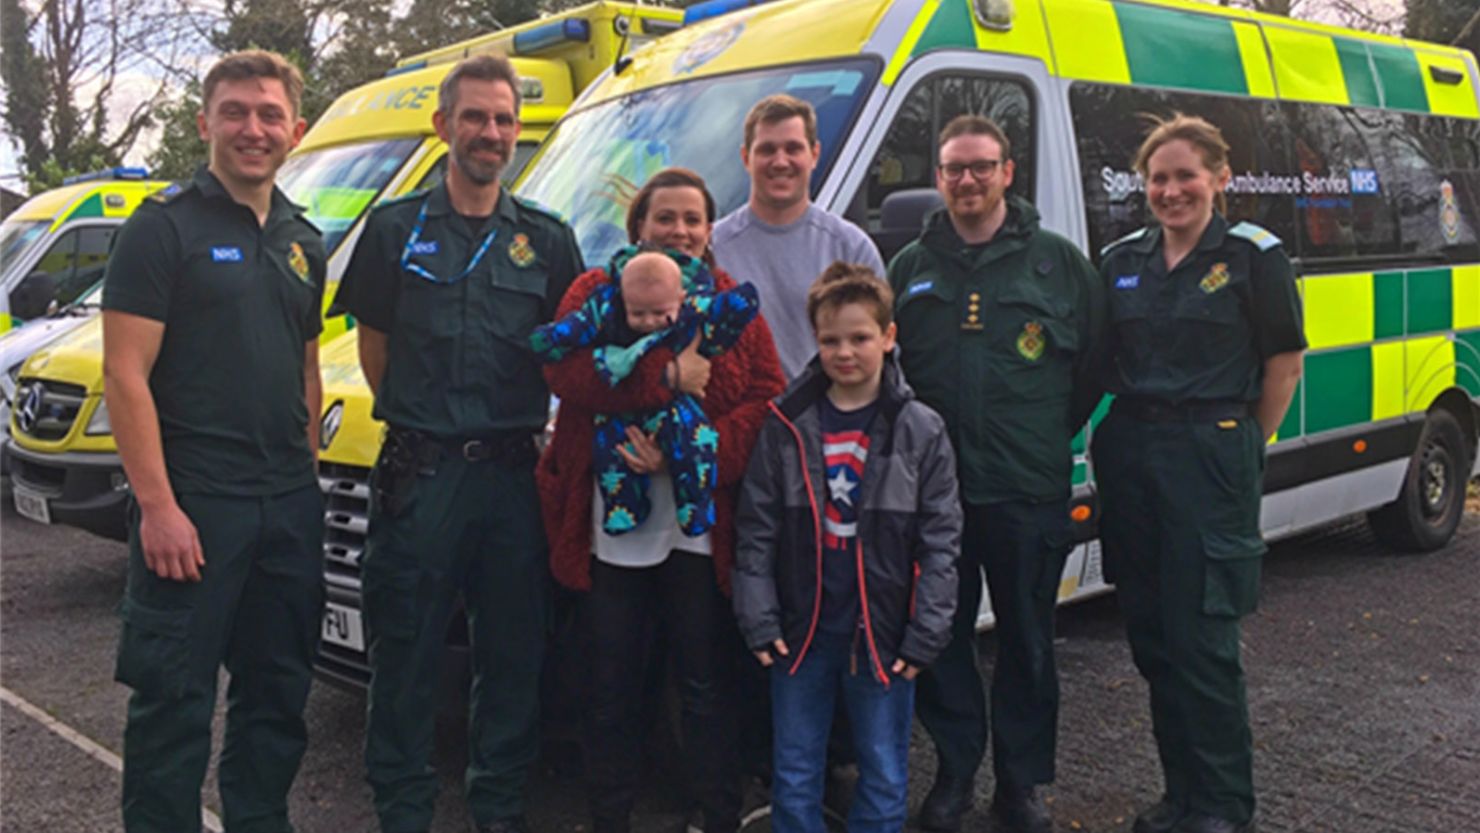 Jayne Rowland, her partner, Joshua Mogg, and her sons thanked ambulance staff after they talked her through giving birth on the highway. 